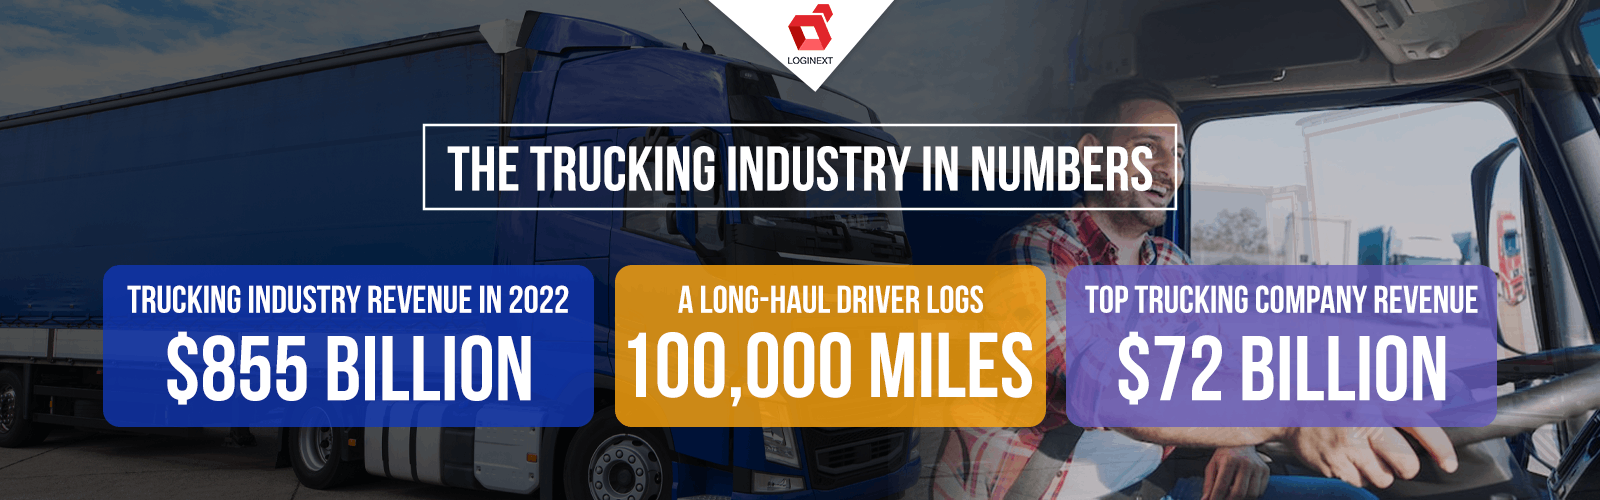 Catch All The Insights of The Global Trucking Industry